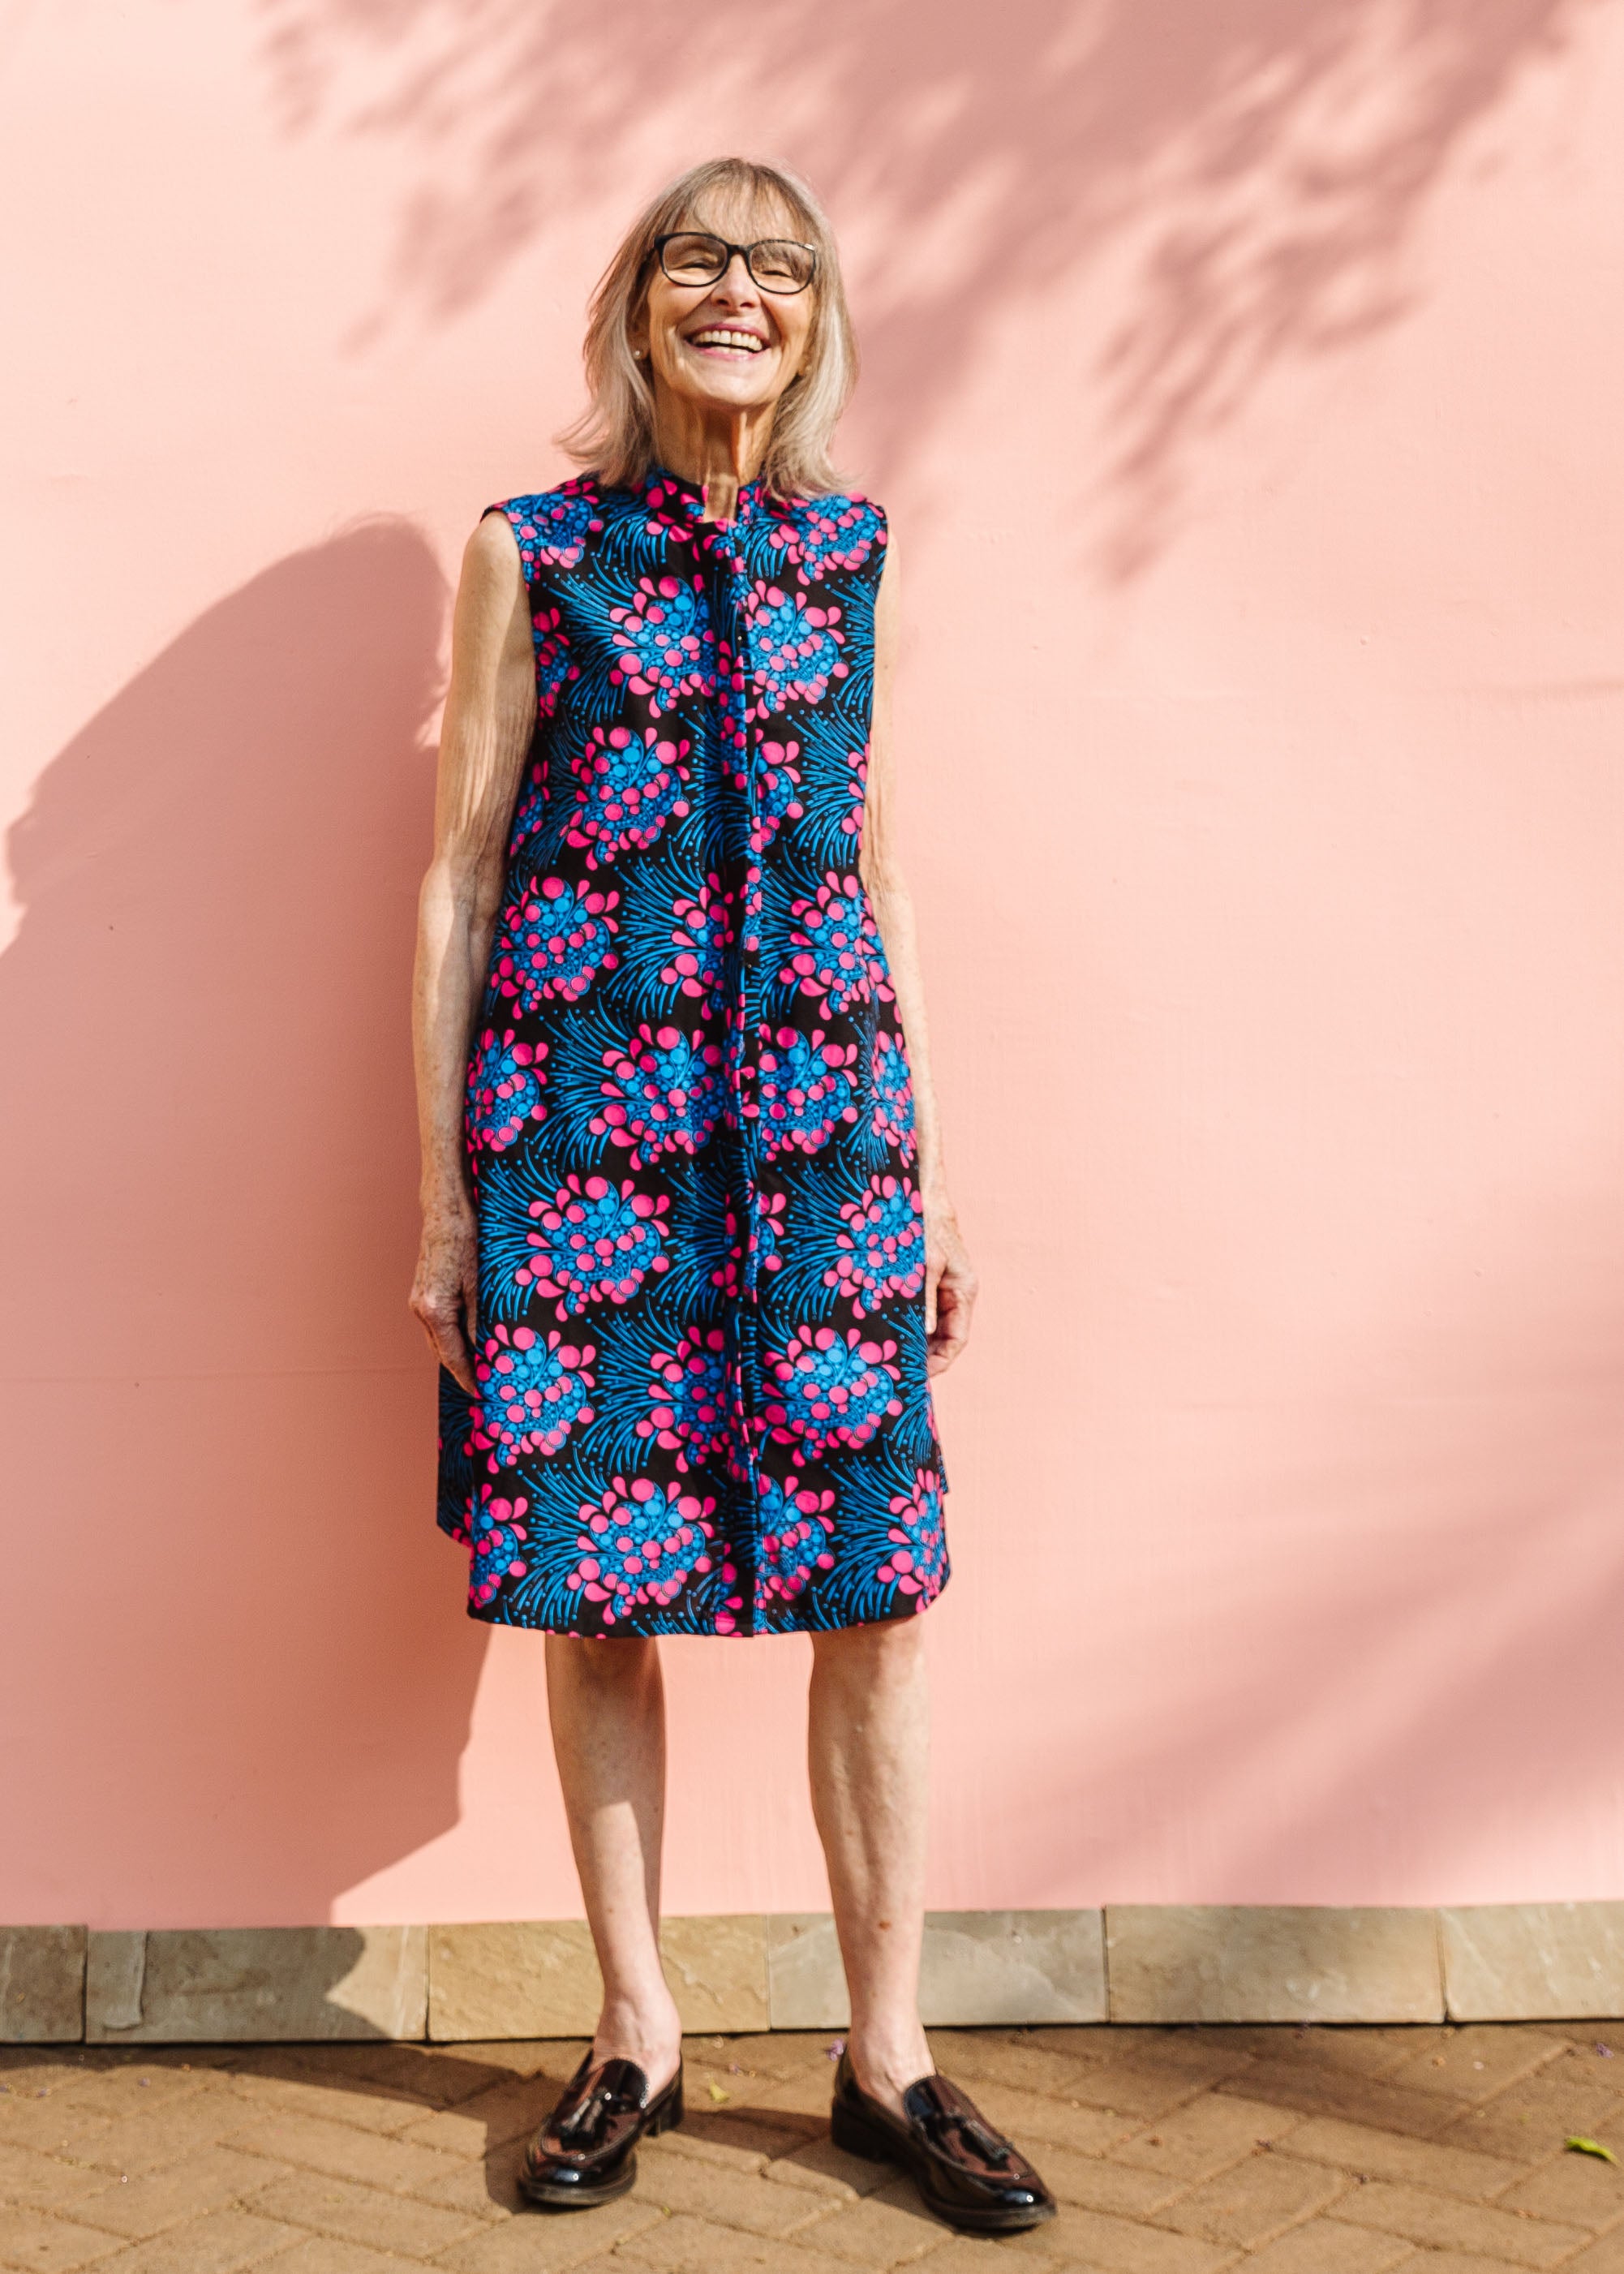 Model wearing black sleeveless dress with blue and pink poppy print.